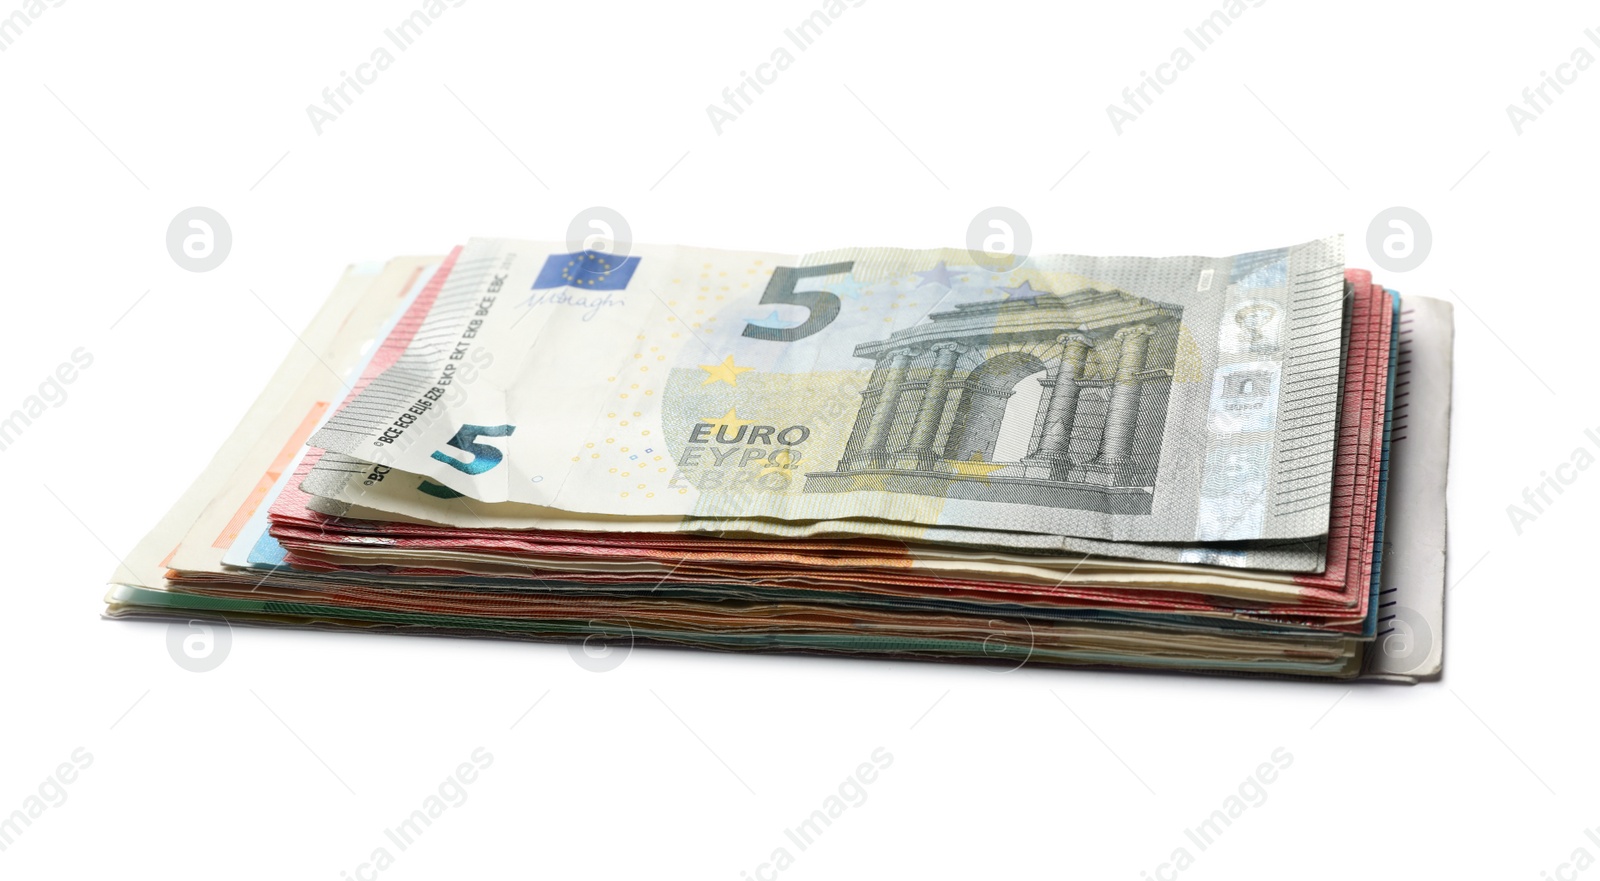 Image of Pile of different Euro banknotes on white background